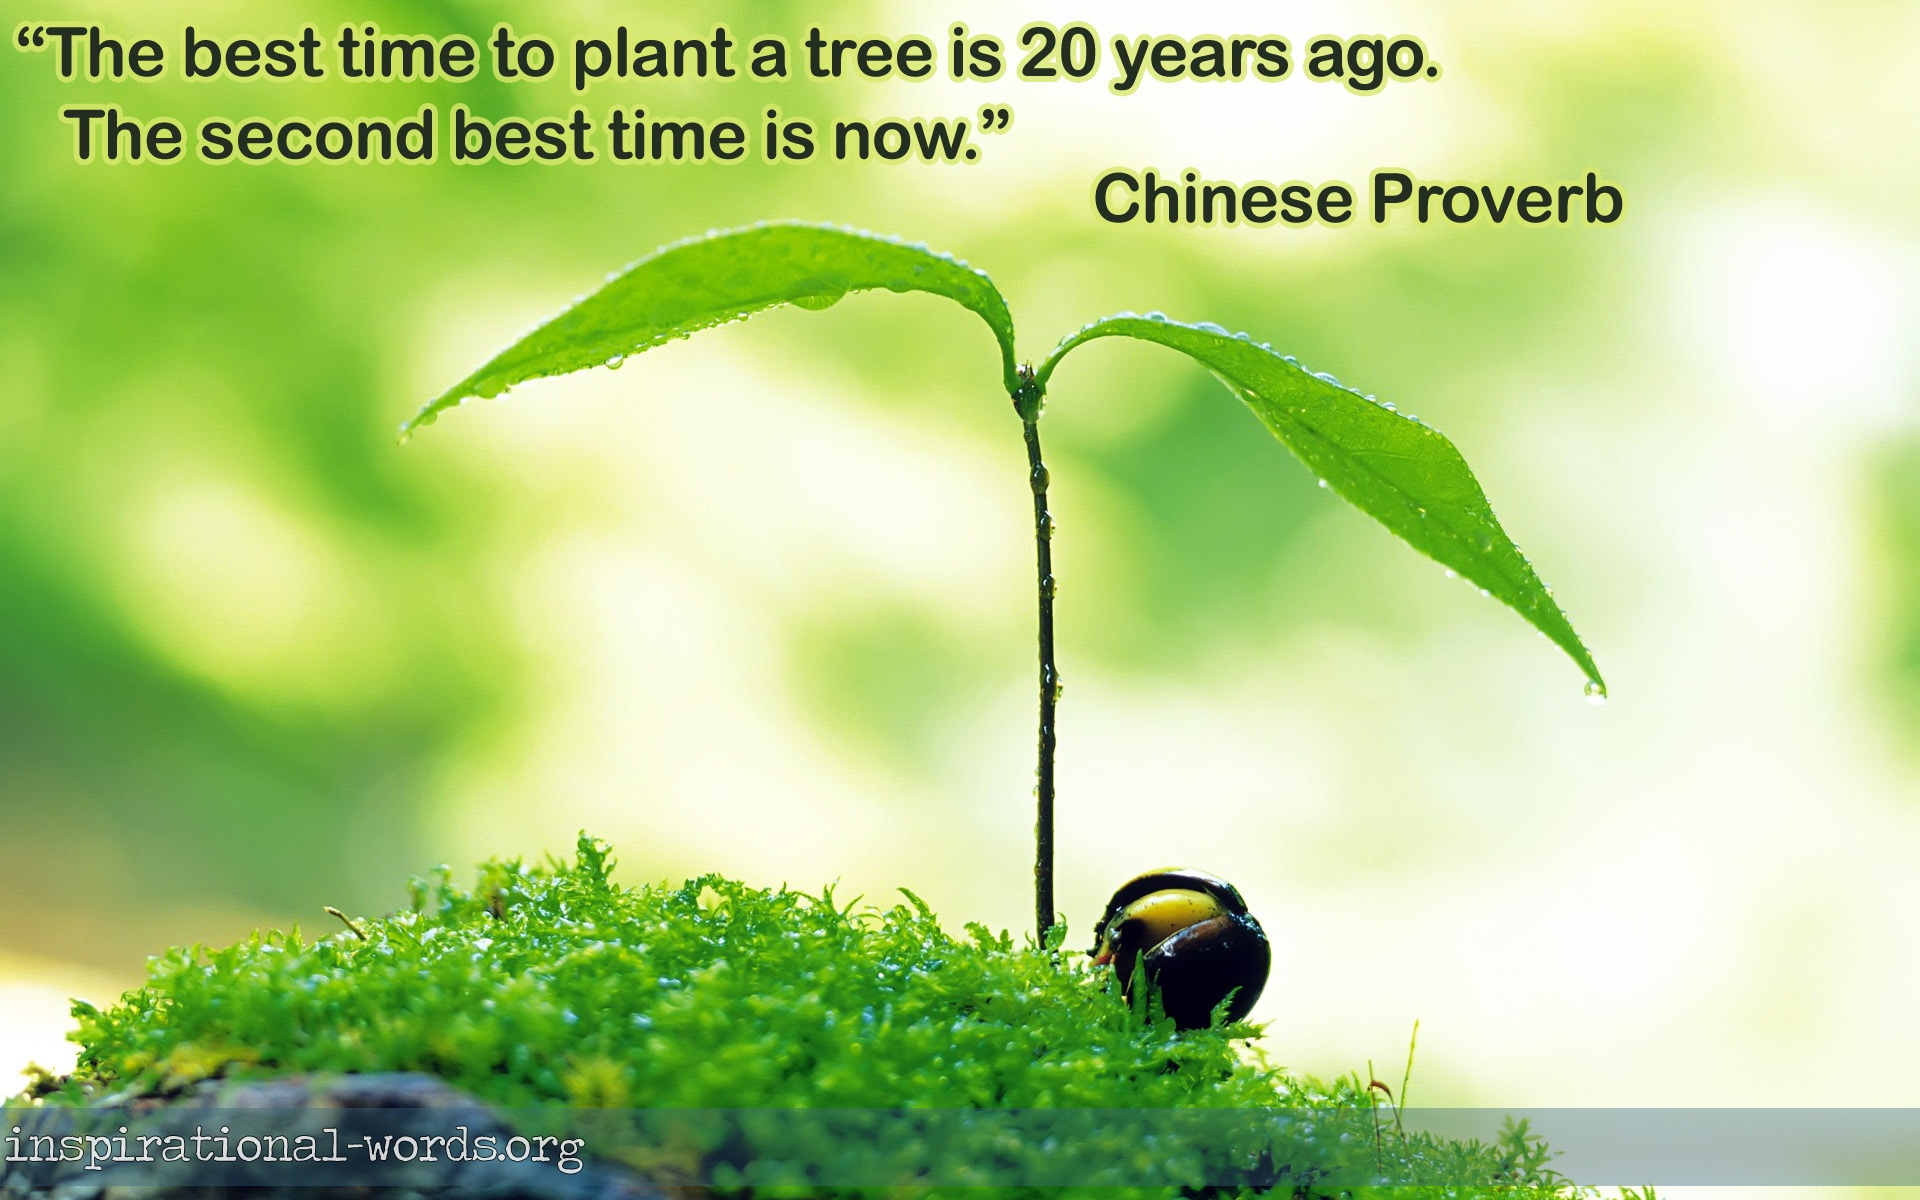 Chinese Proverb inspirational wallpaper